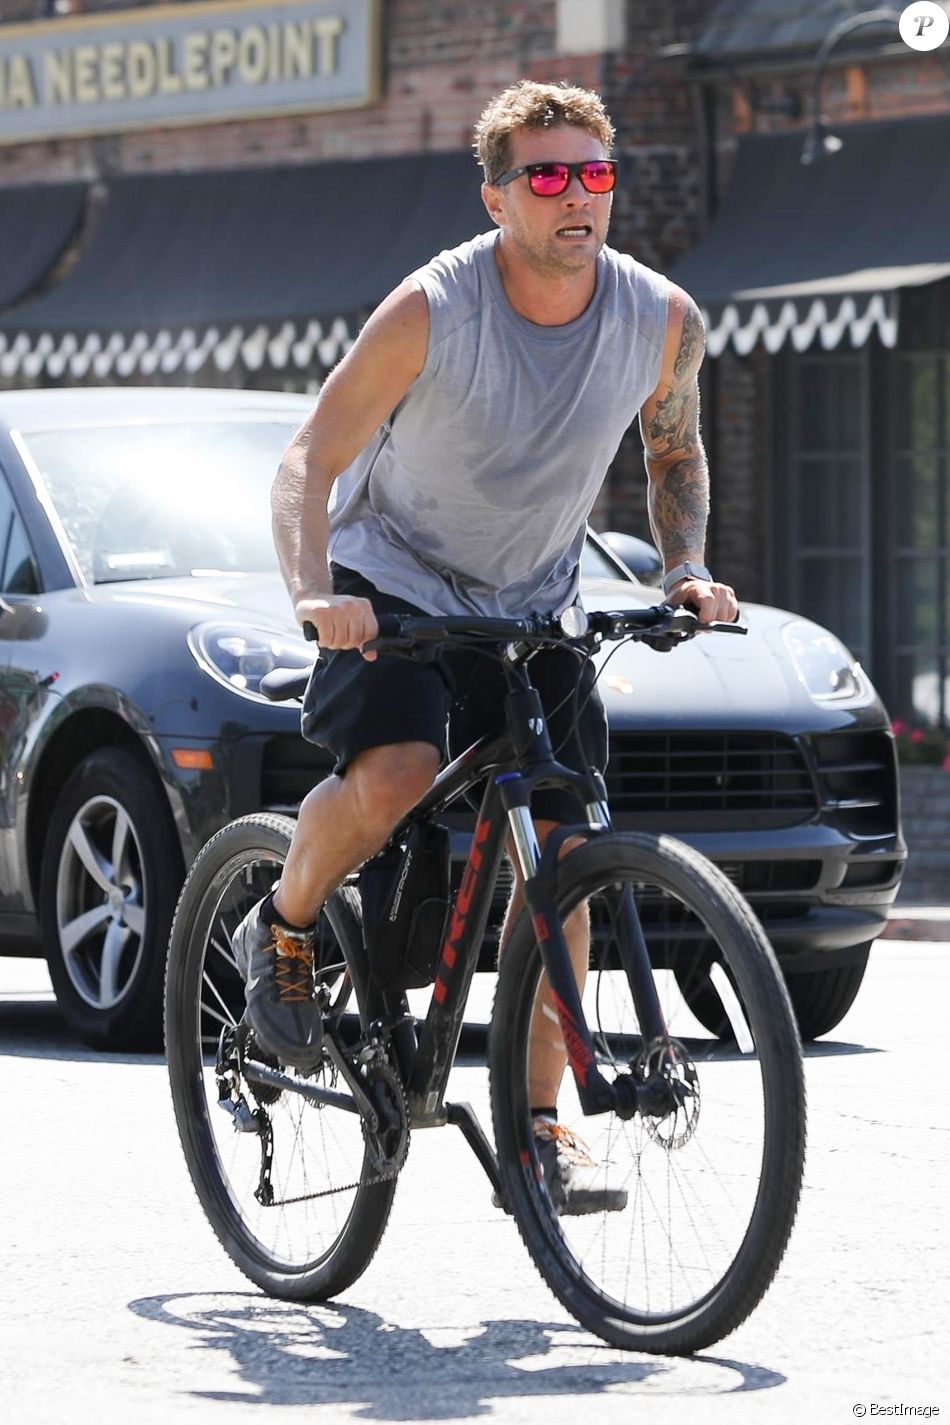 Exclusif - Ryan Phillippe et son fils Deacon Reese Philippe font du vélo à Los Angeles Le 21 septembre 2019 Merci de flouter le visage des enfants avant publication  Brentwood, CA - EXCLUSIVE - Ryan Phillippe and his son Deacon Reese Phillippe go for a bike ride together. The two seem to be having tons of fun while racing around on their bikes in Brentwood. Deacon appeared to be struggling to keep his father&#039;s pace.21/09/2019 - Los Angeles